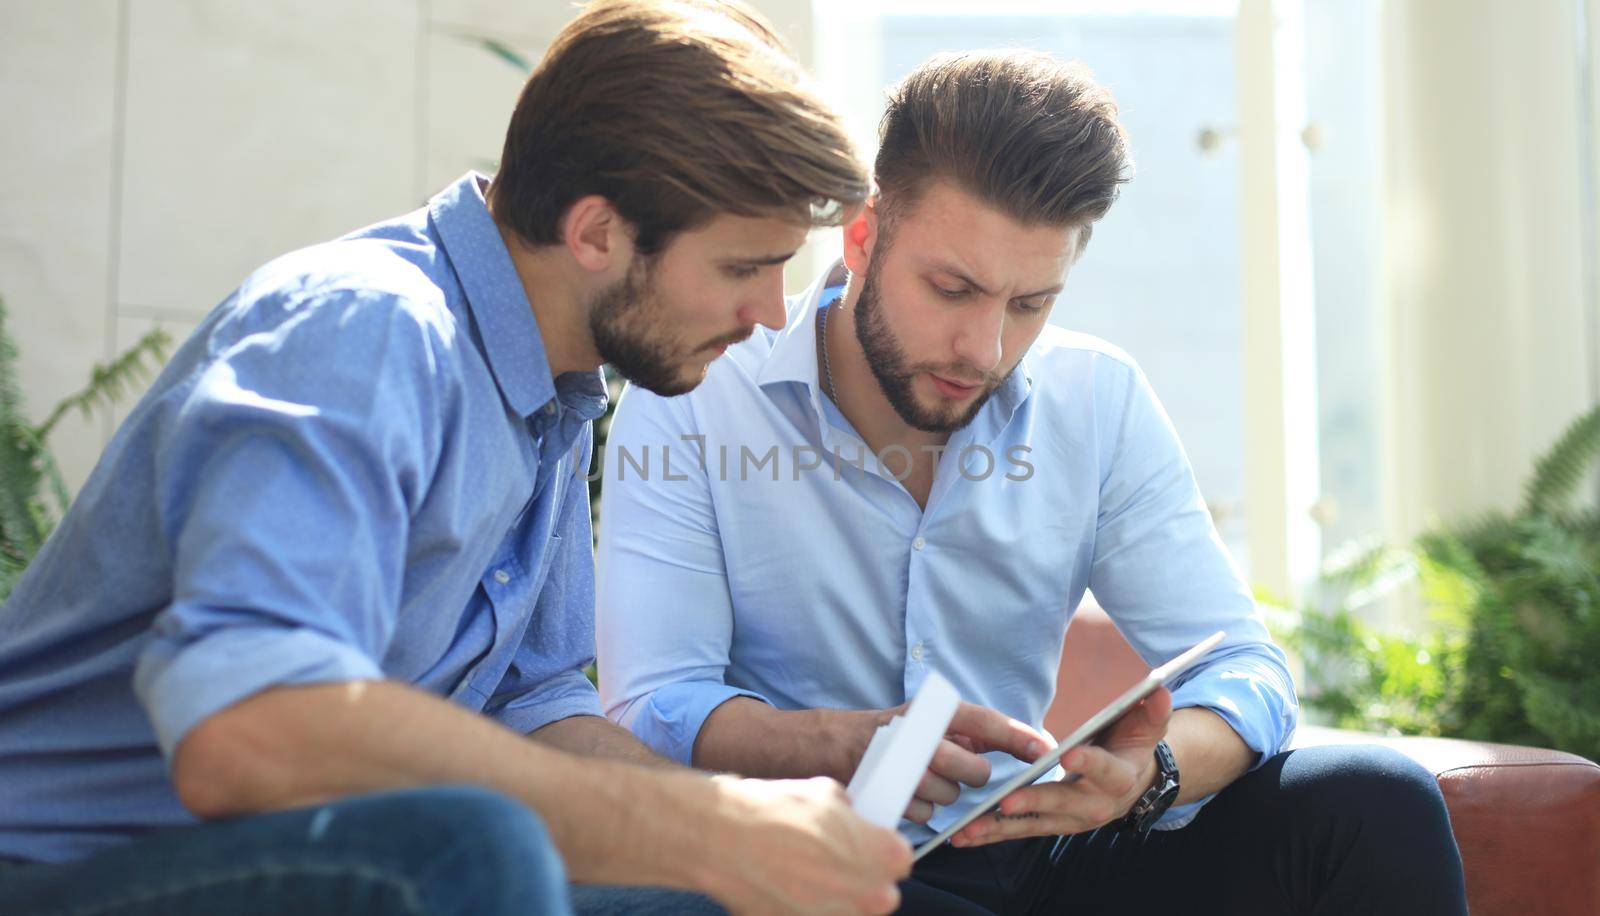 Mature businessman using a digital tablet to discuss information with a younger colleague in a modern business office